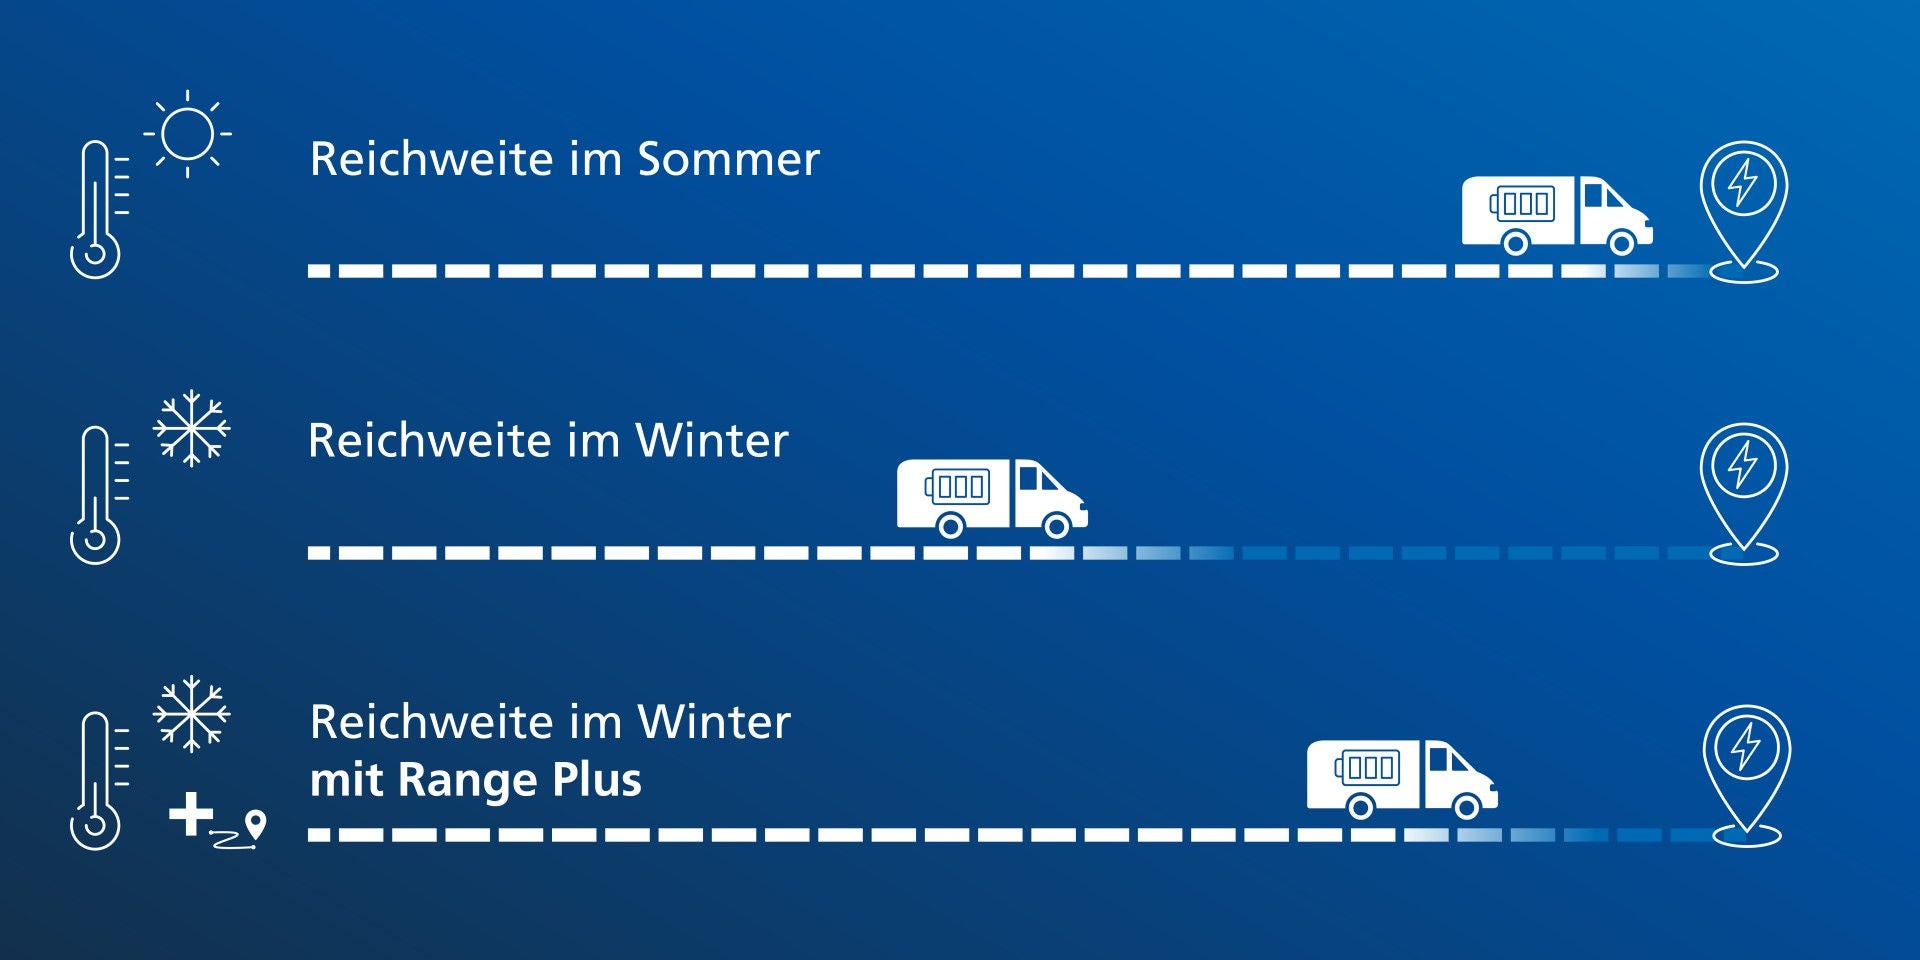 Illustration of reach of electrical vehicles in winter with and without Webasto Range Plus